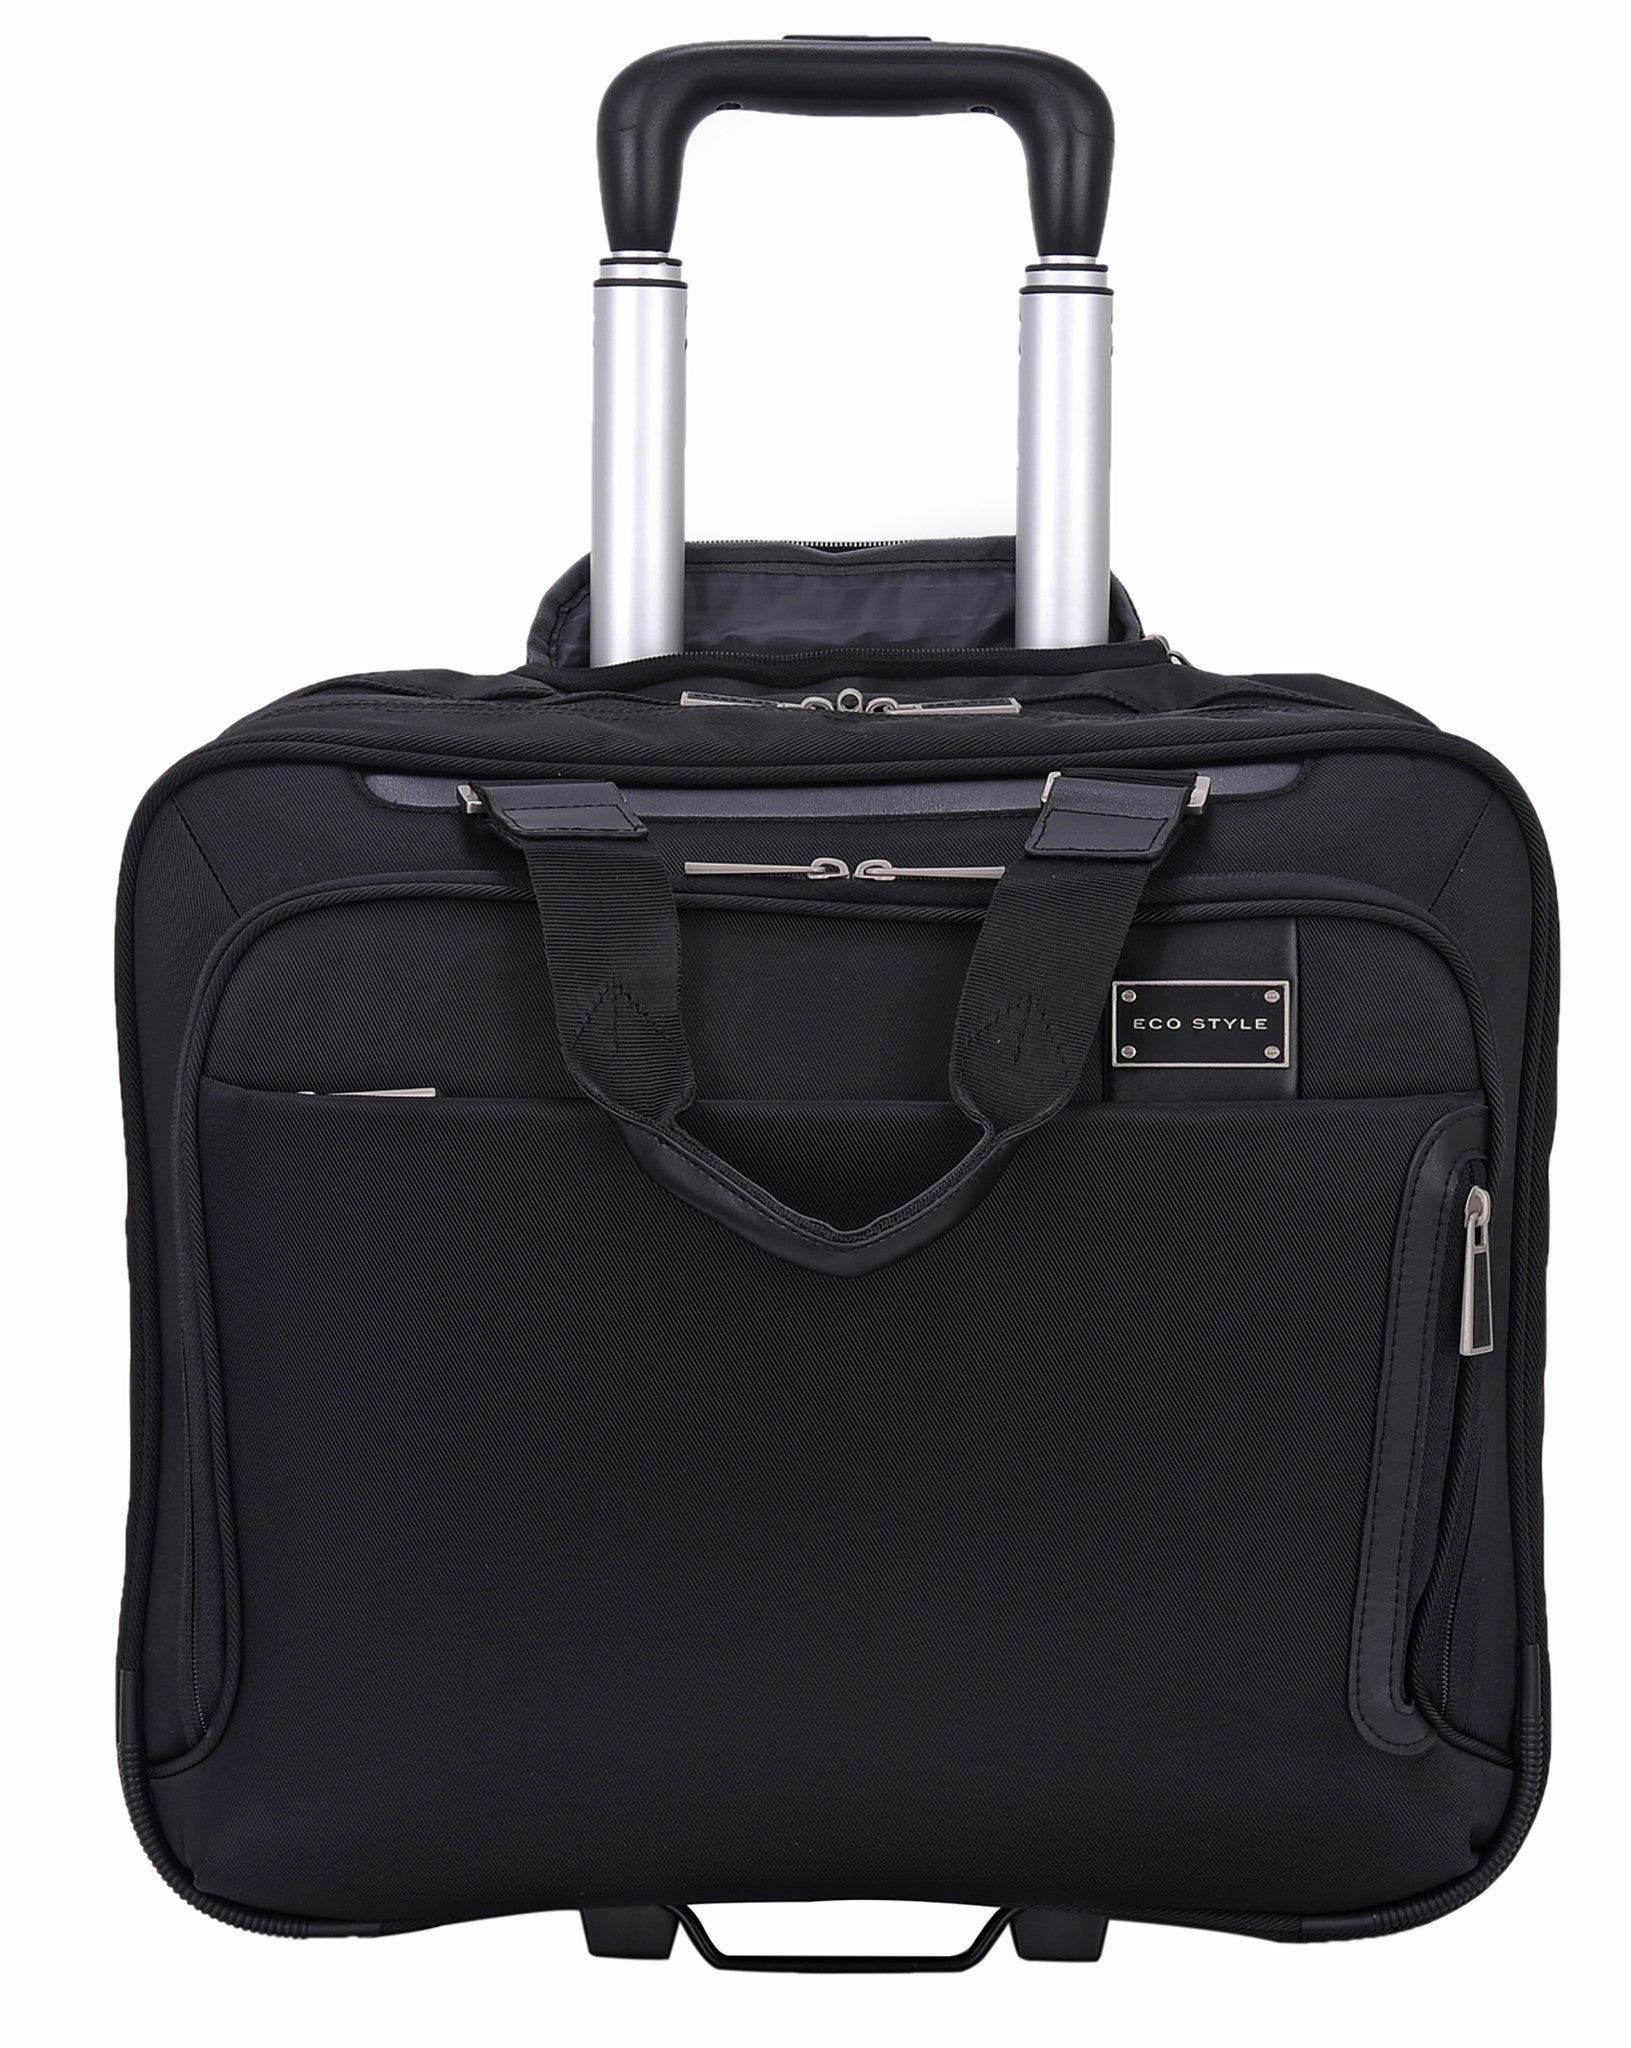 Tech Exec Rolling Case – ECO STYLE